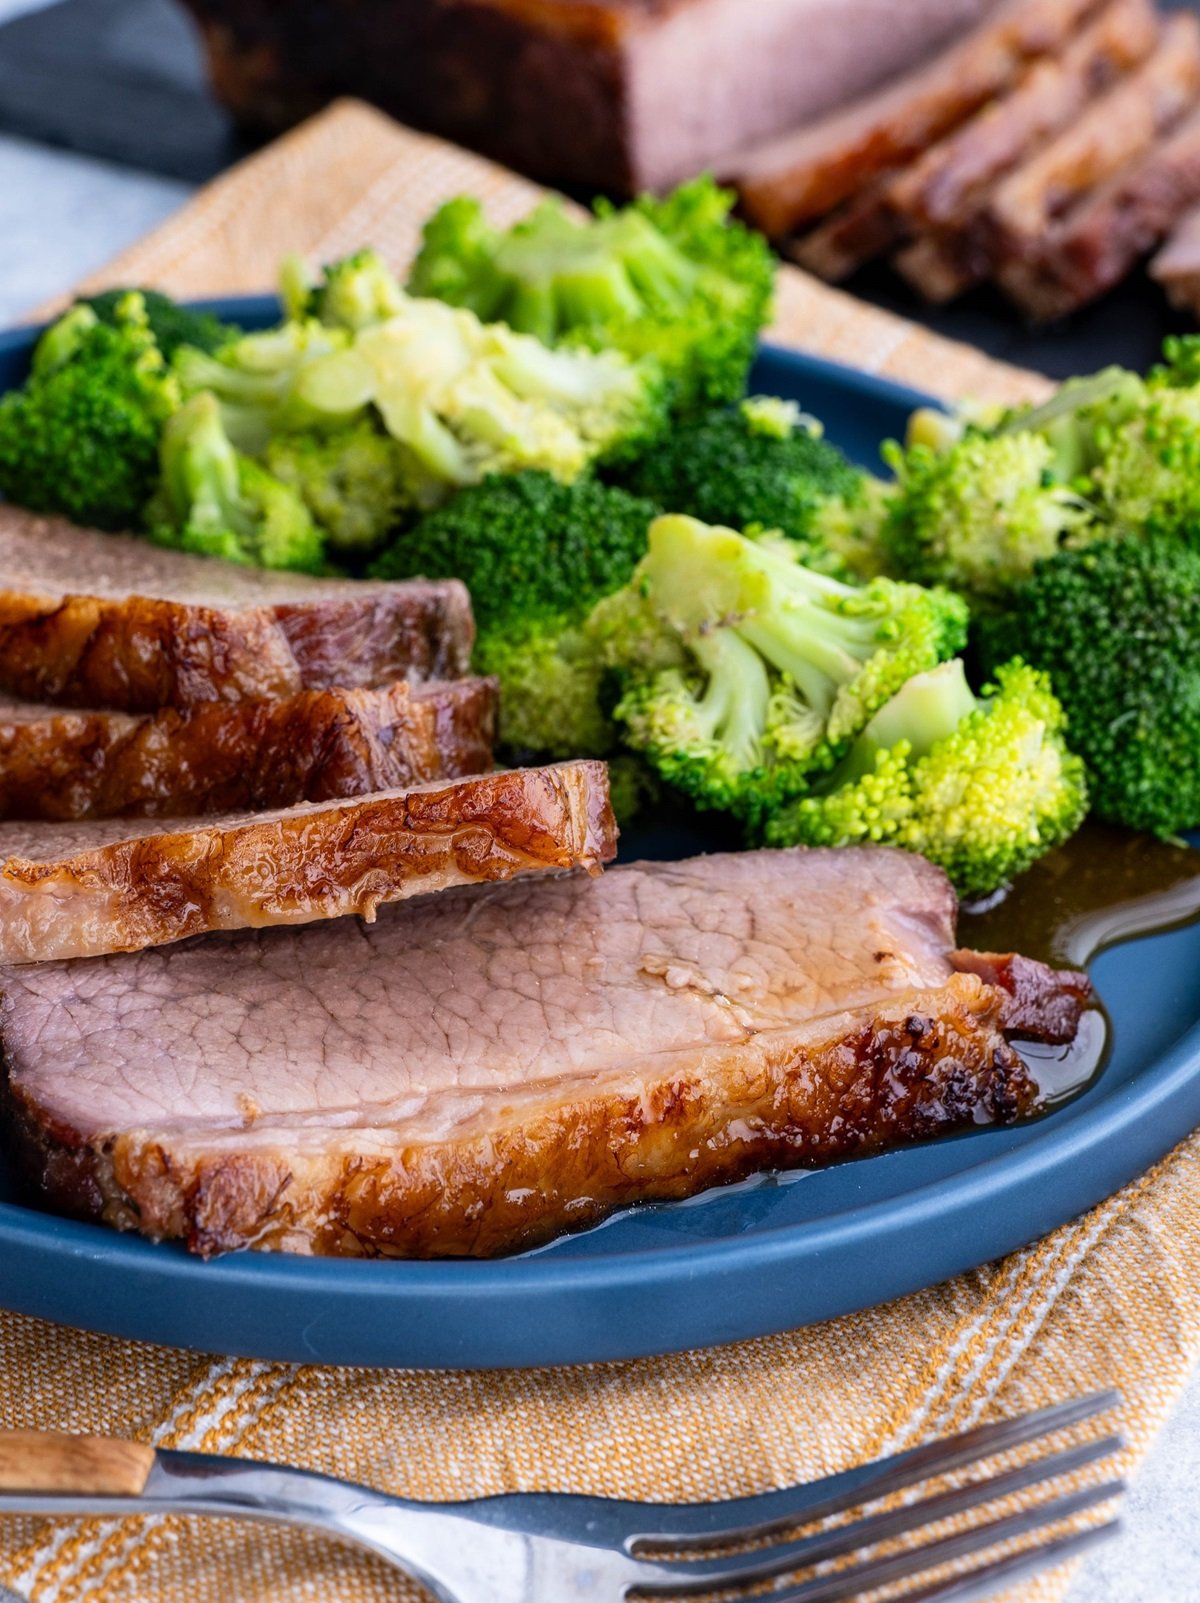 Blue plate of thin slices of brisket with steamed broccoli to the side.